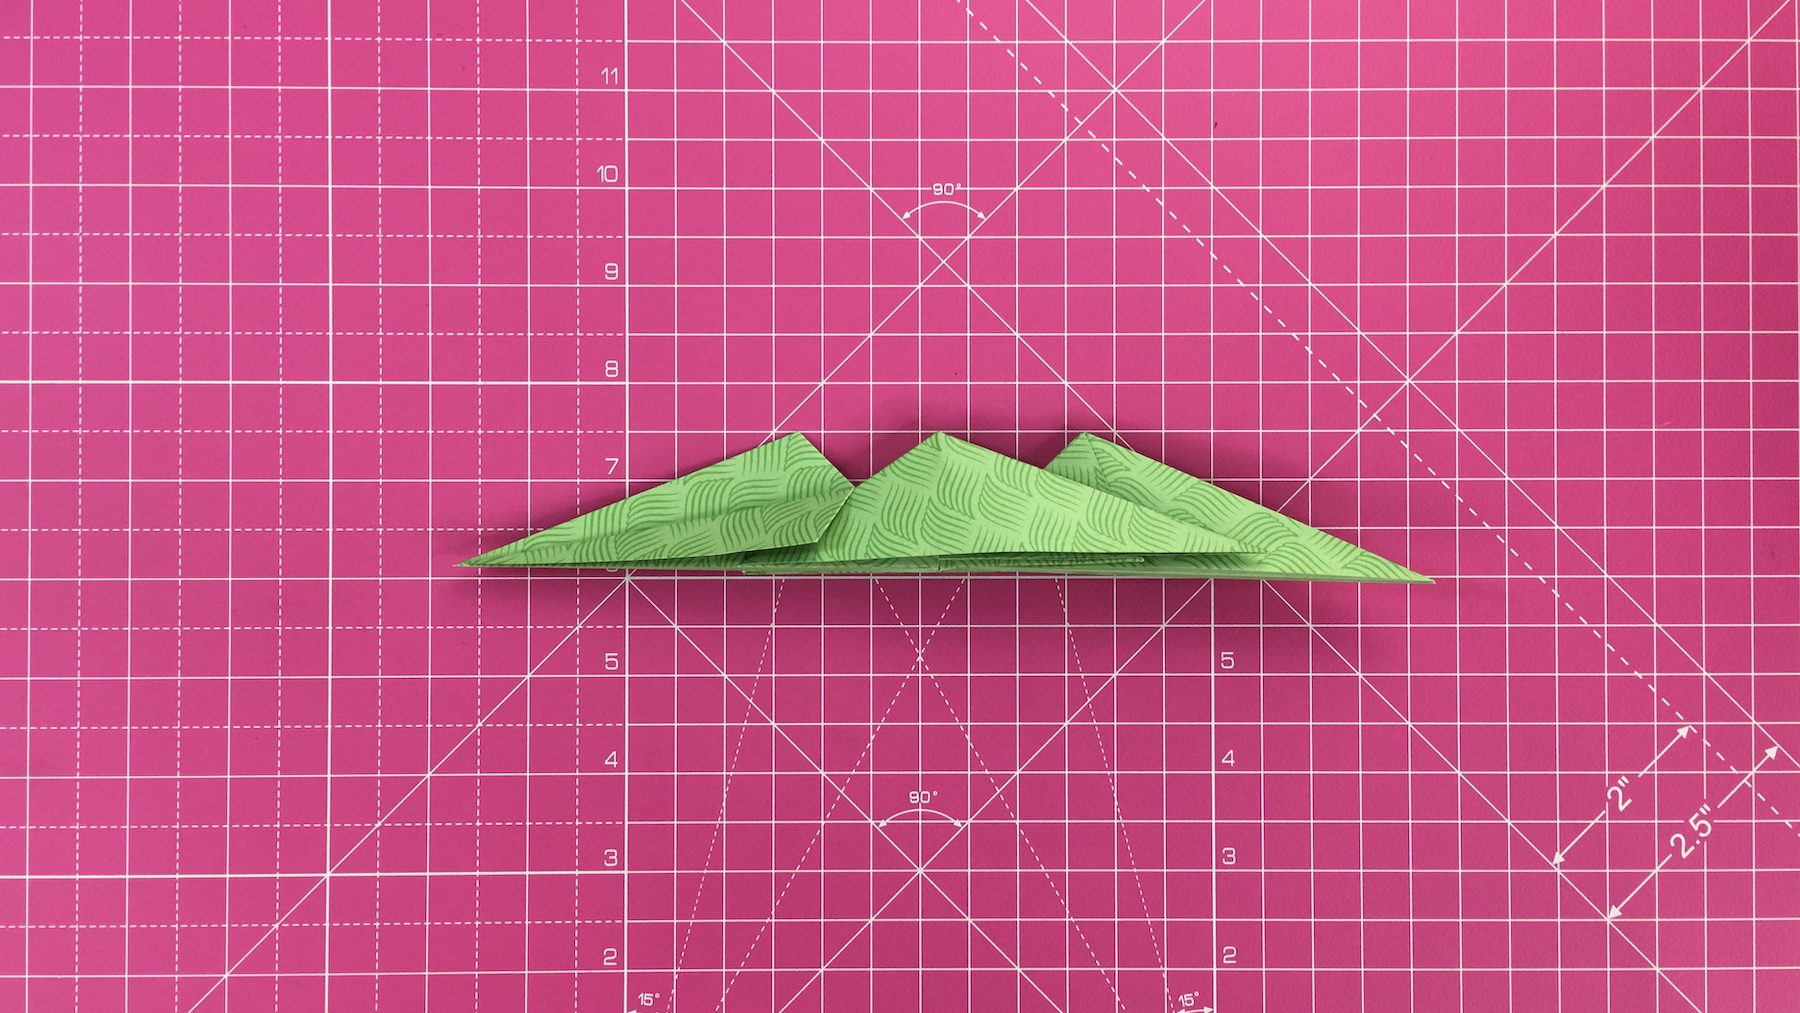 How to make an origami dragon, origami dragon tutorial - step 30